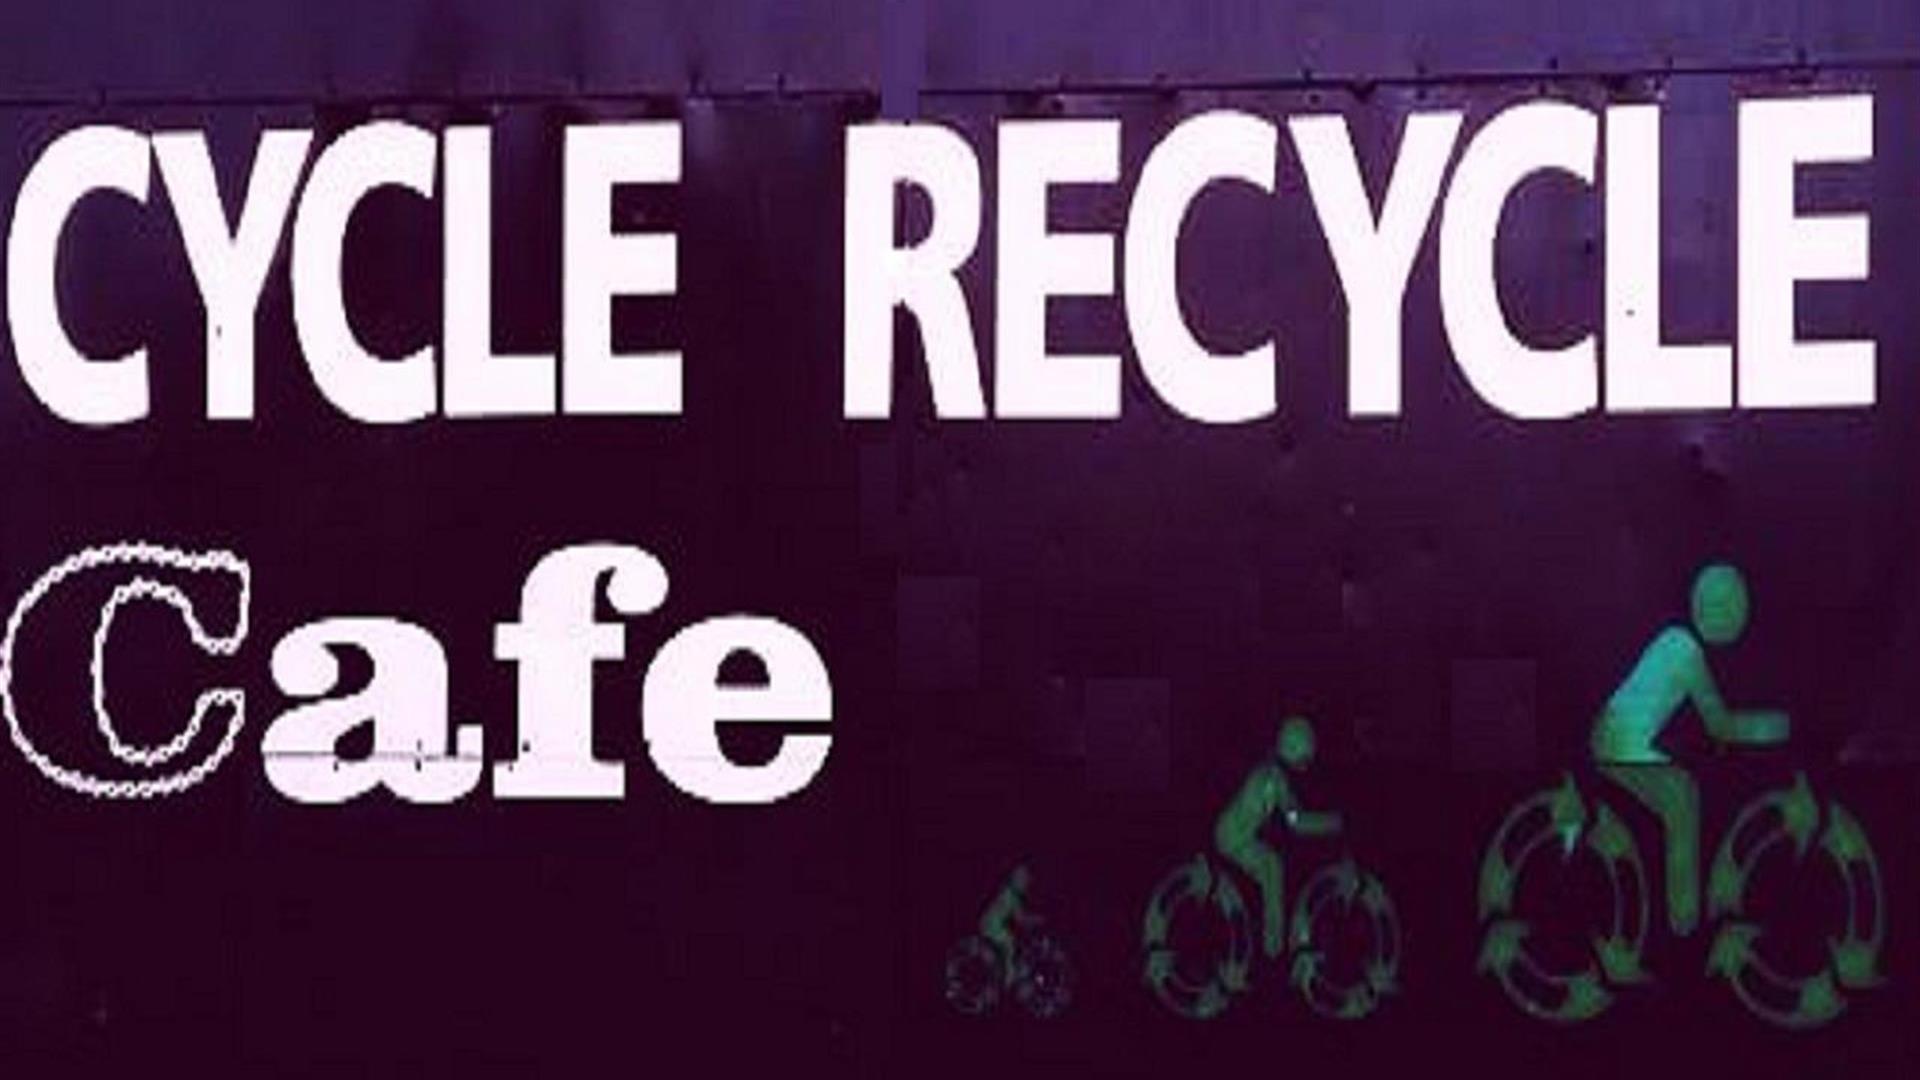 Cycle Recycle Café Newry